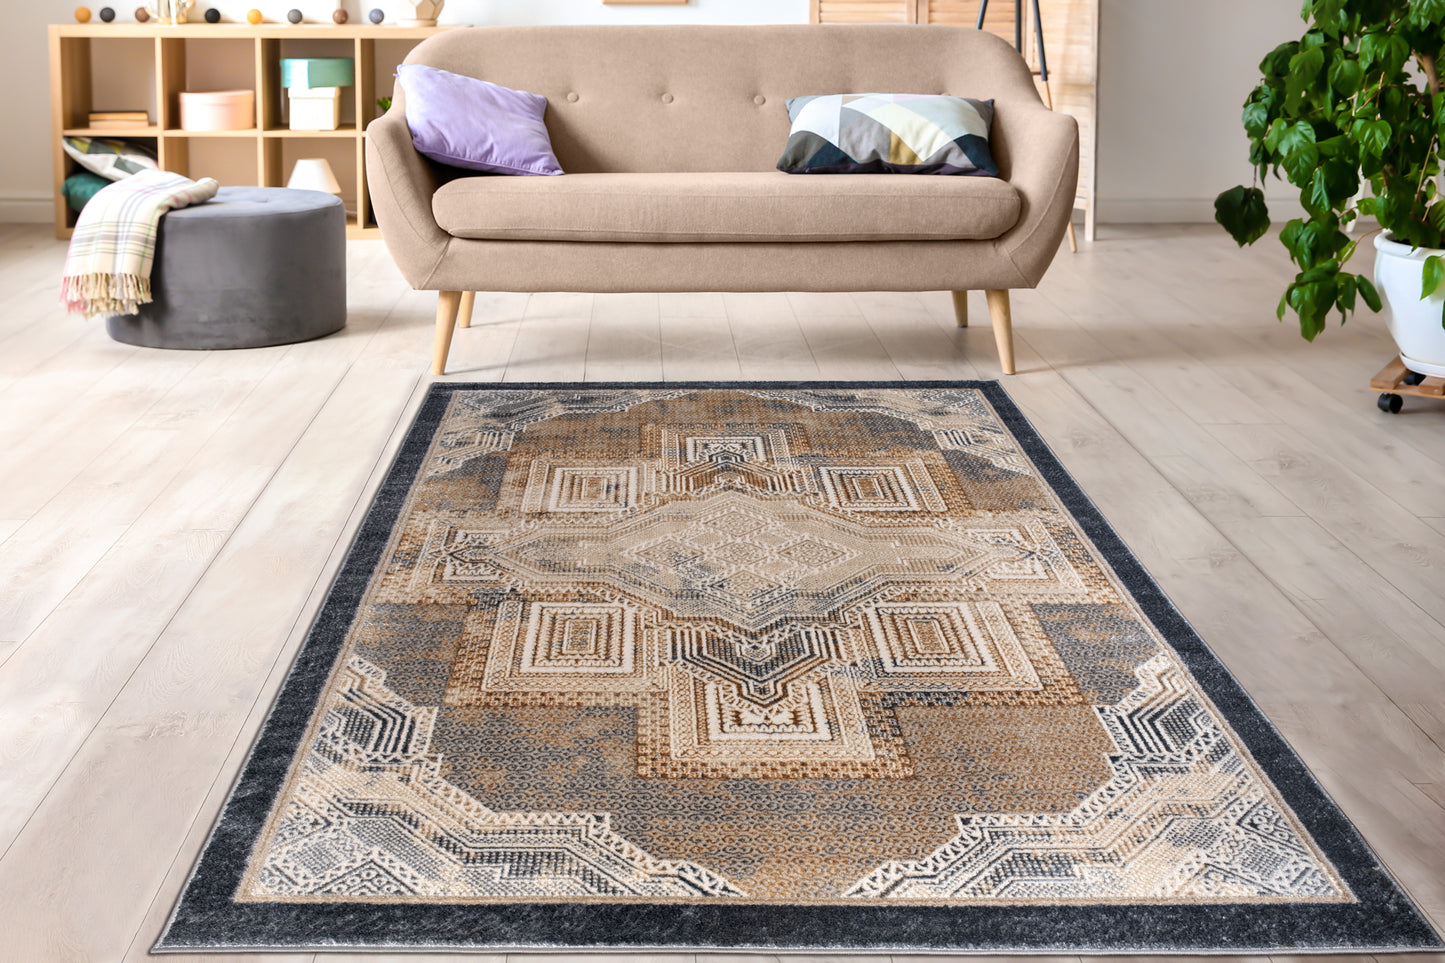 beige brown silver grey metalic traditional geometric contemporary area rug 4x6, 4x5 ft Small Carpet, Home Office, Living Room, Bedroom